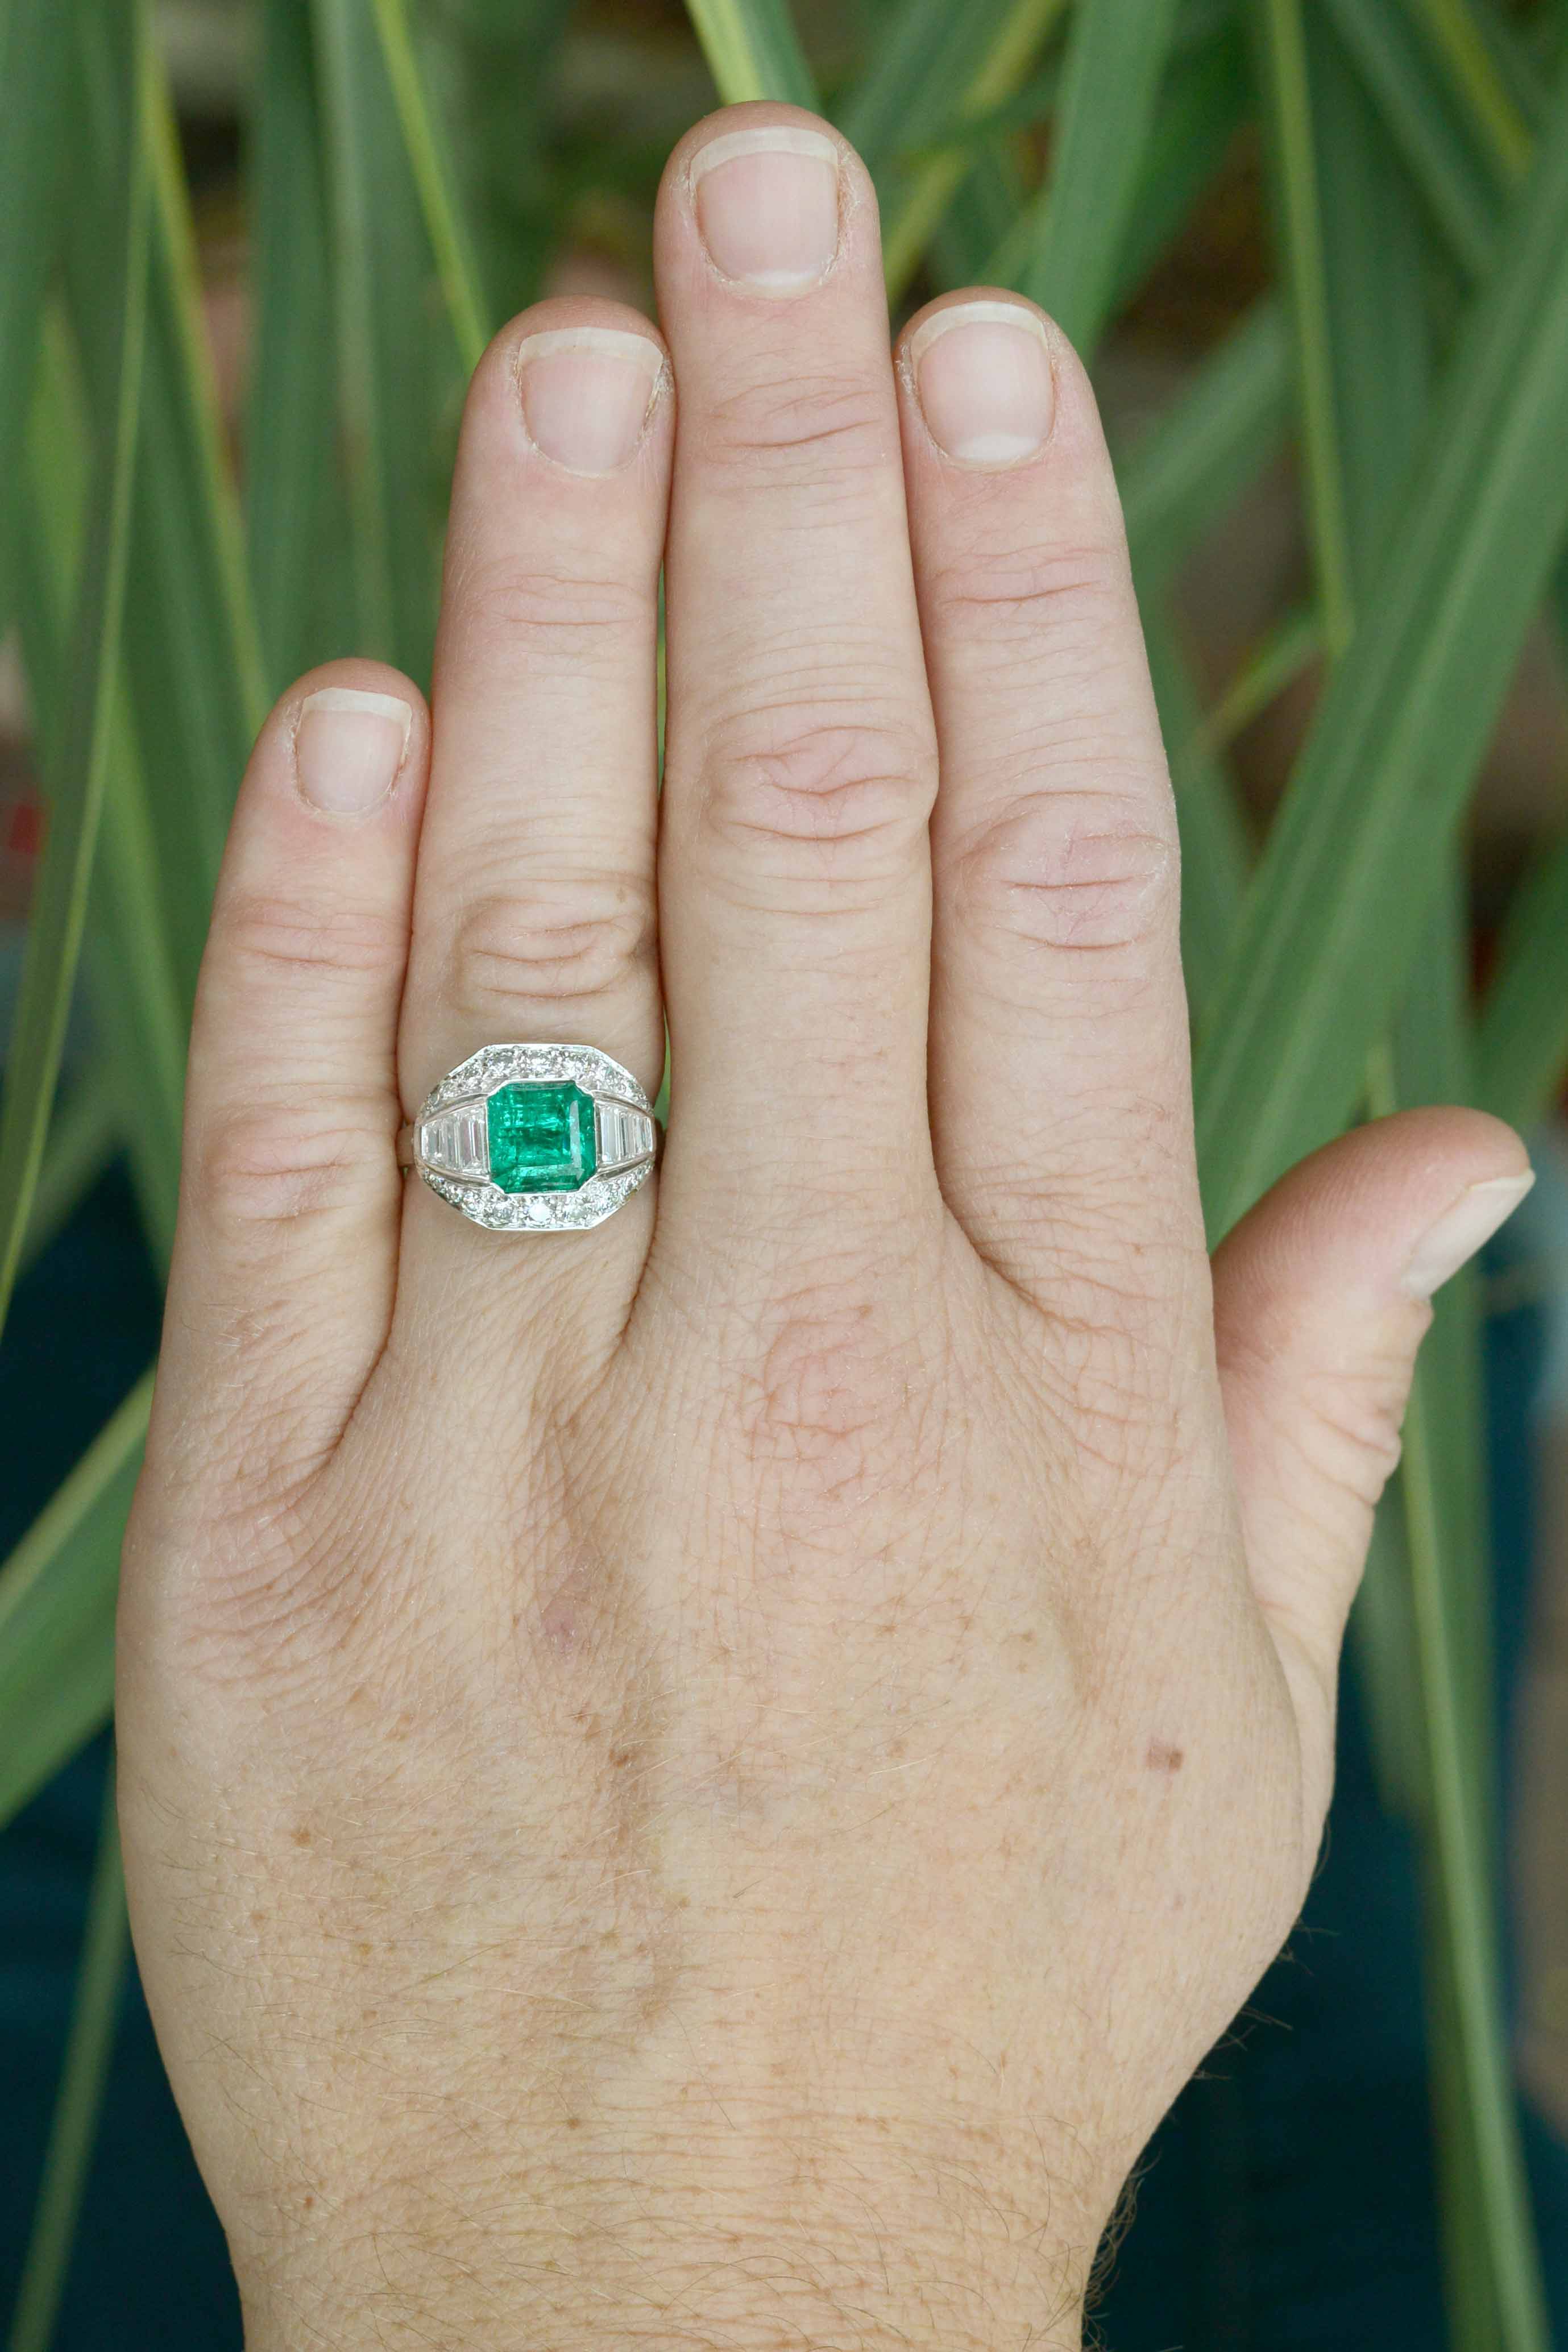 An Art Deco statement ring with a square emerald, accented by diamonds.